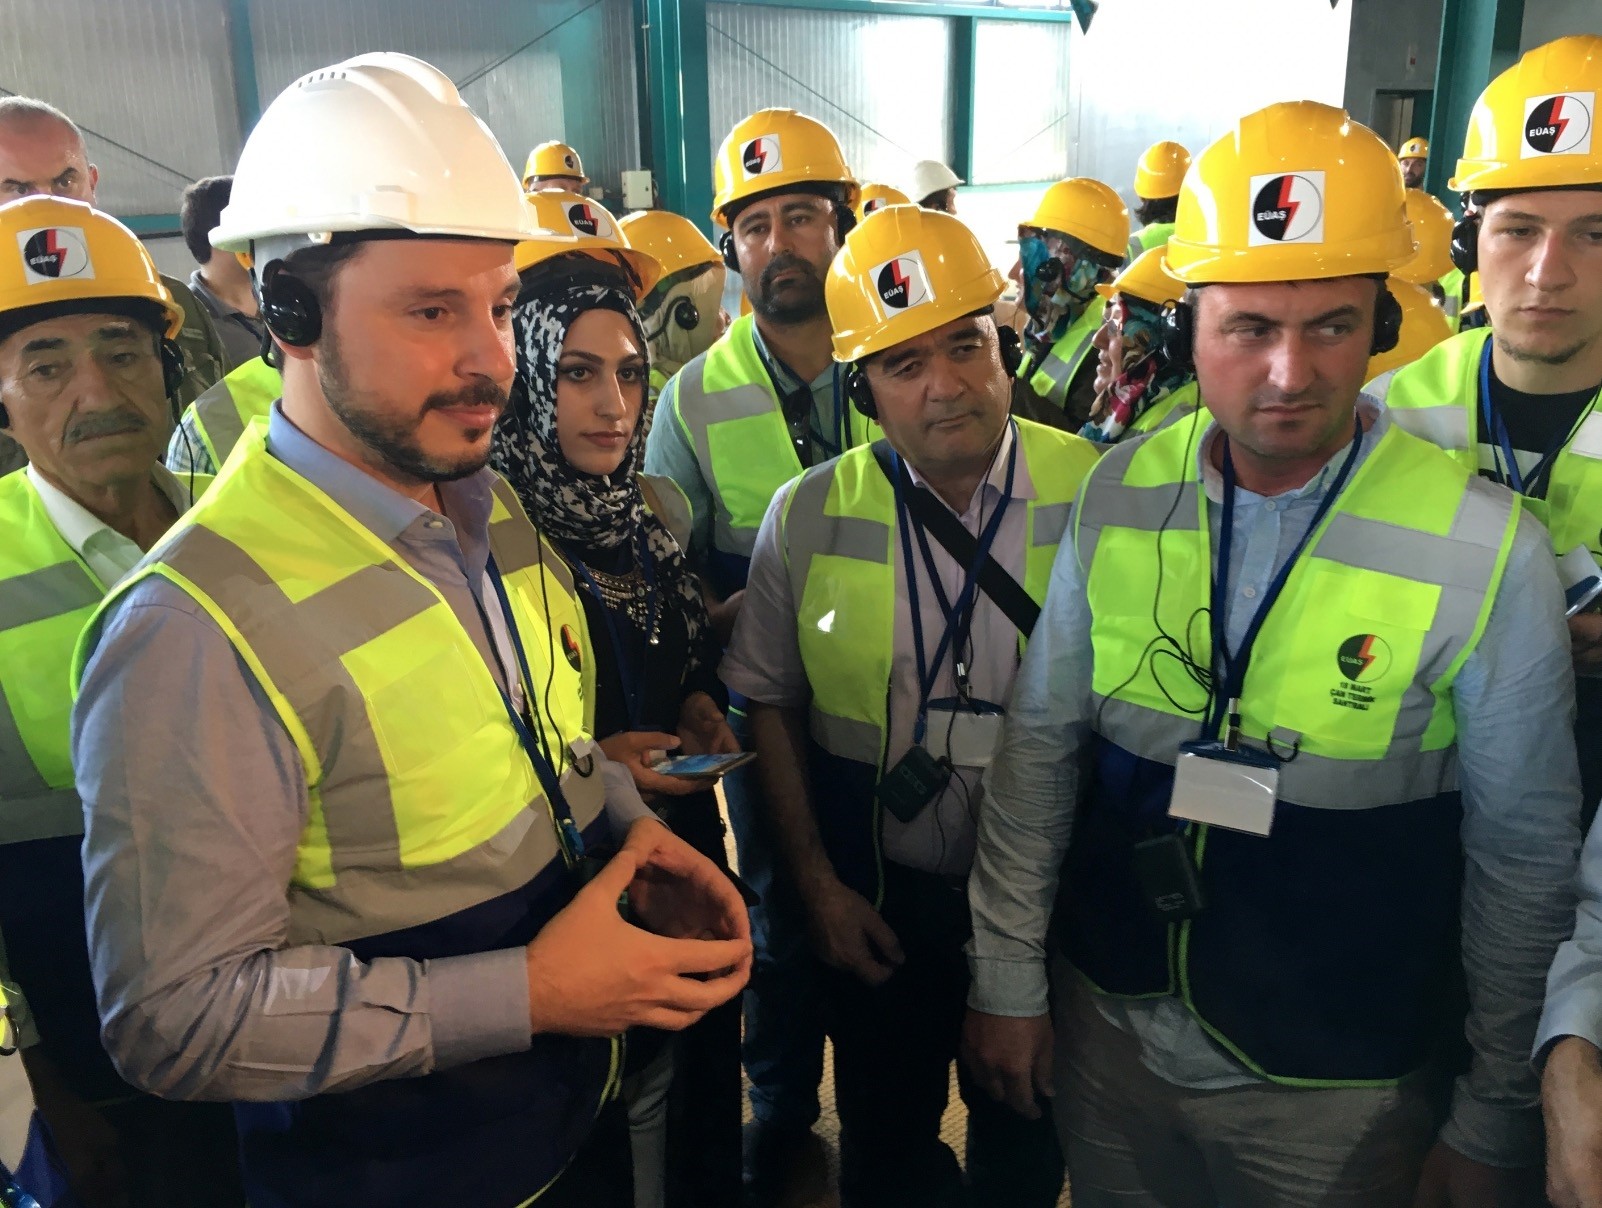 Energy Minister Berat Albayrak, first from left, visits to the new-generation u00c7an thermal power plant.